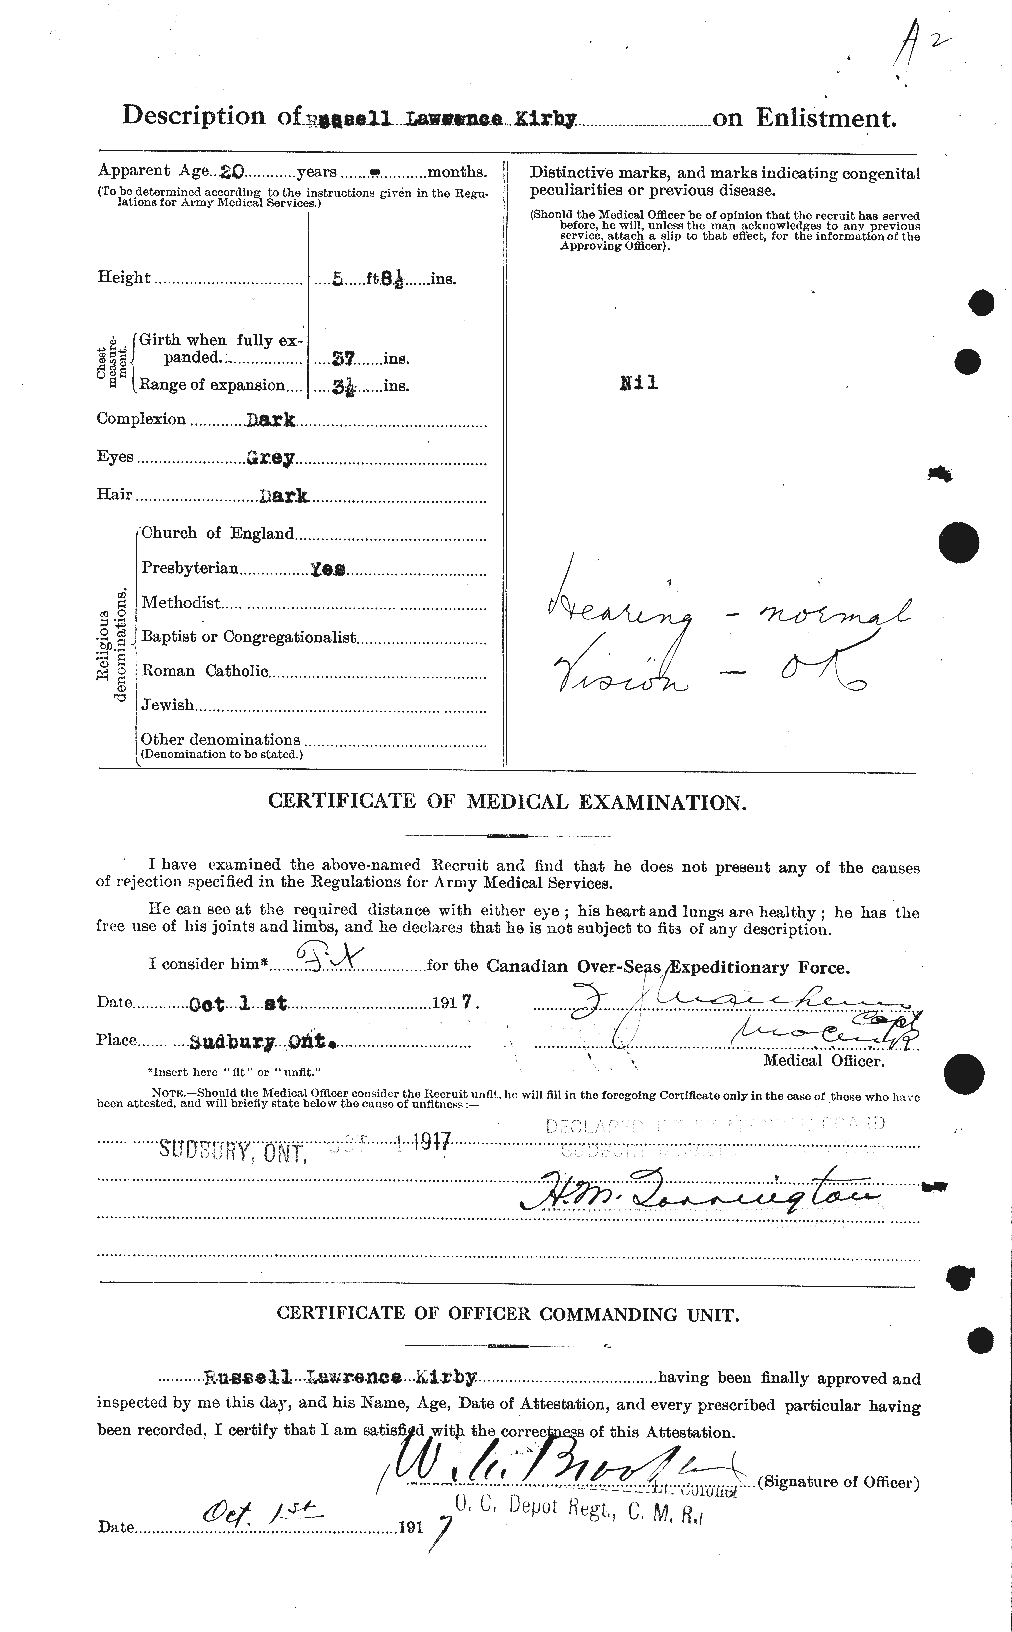 Personnel Records of the First World War - CEF 437272b